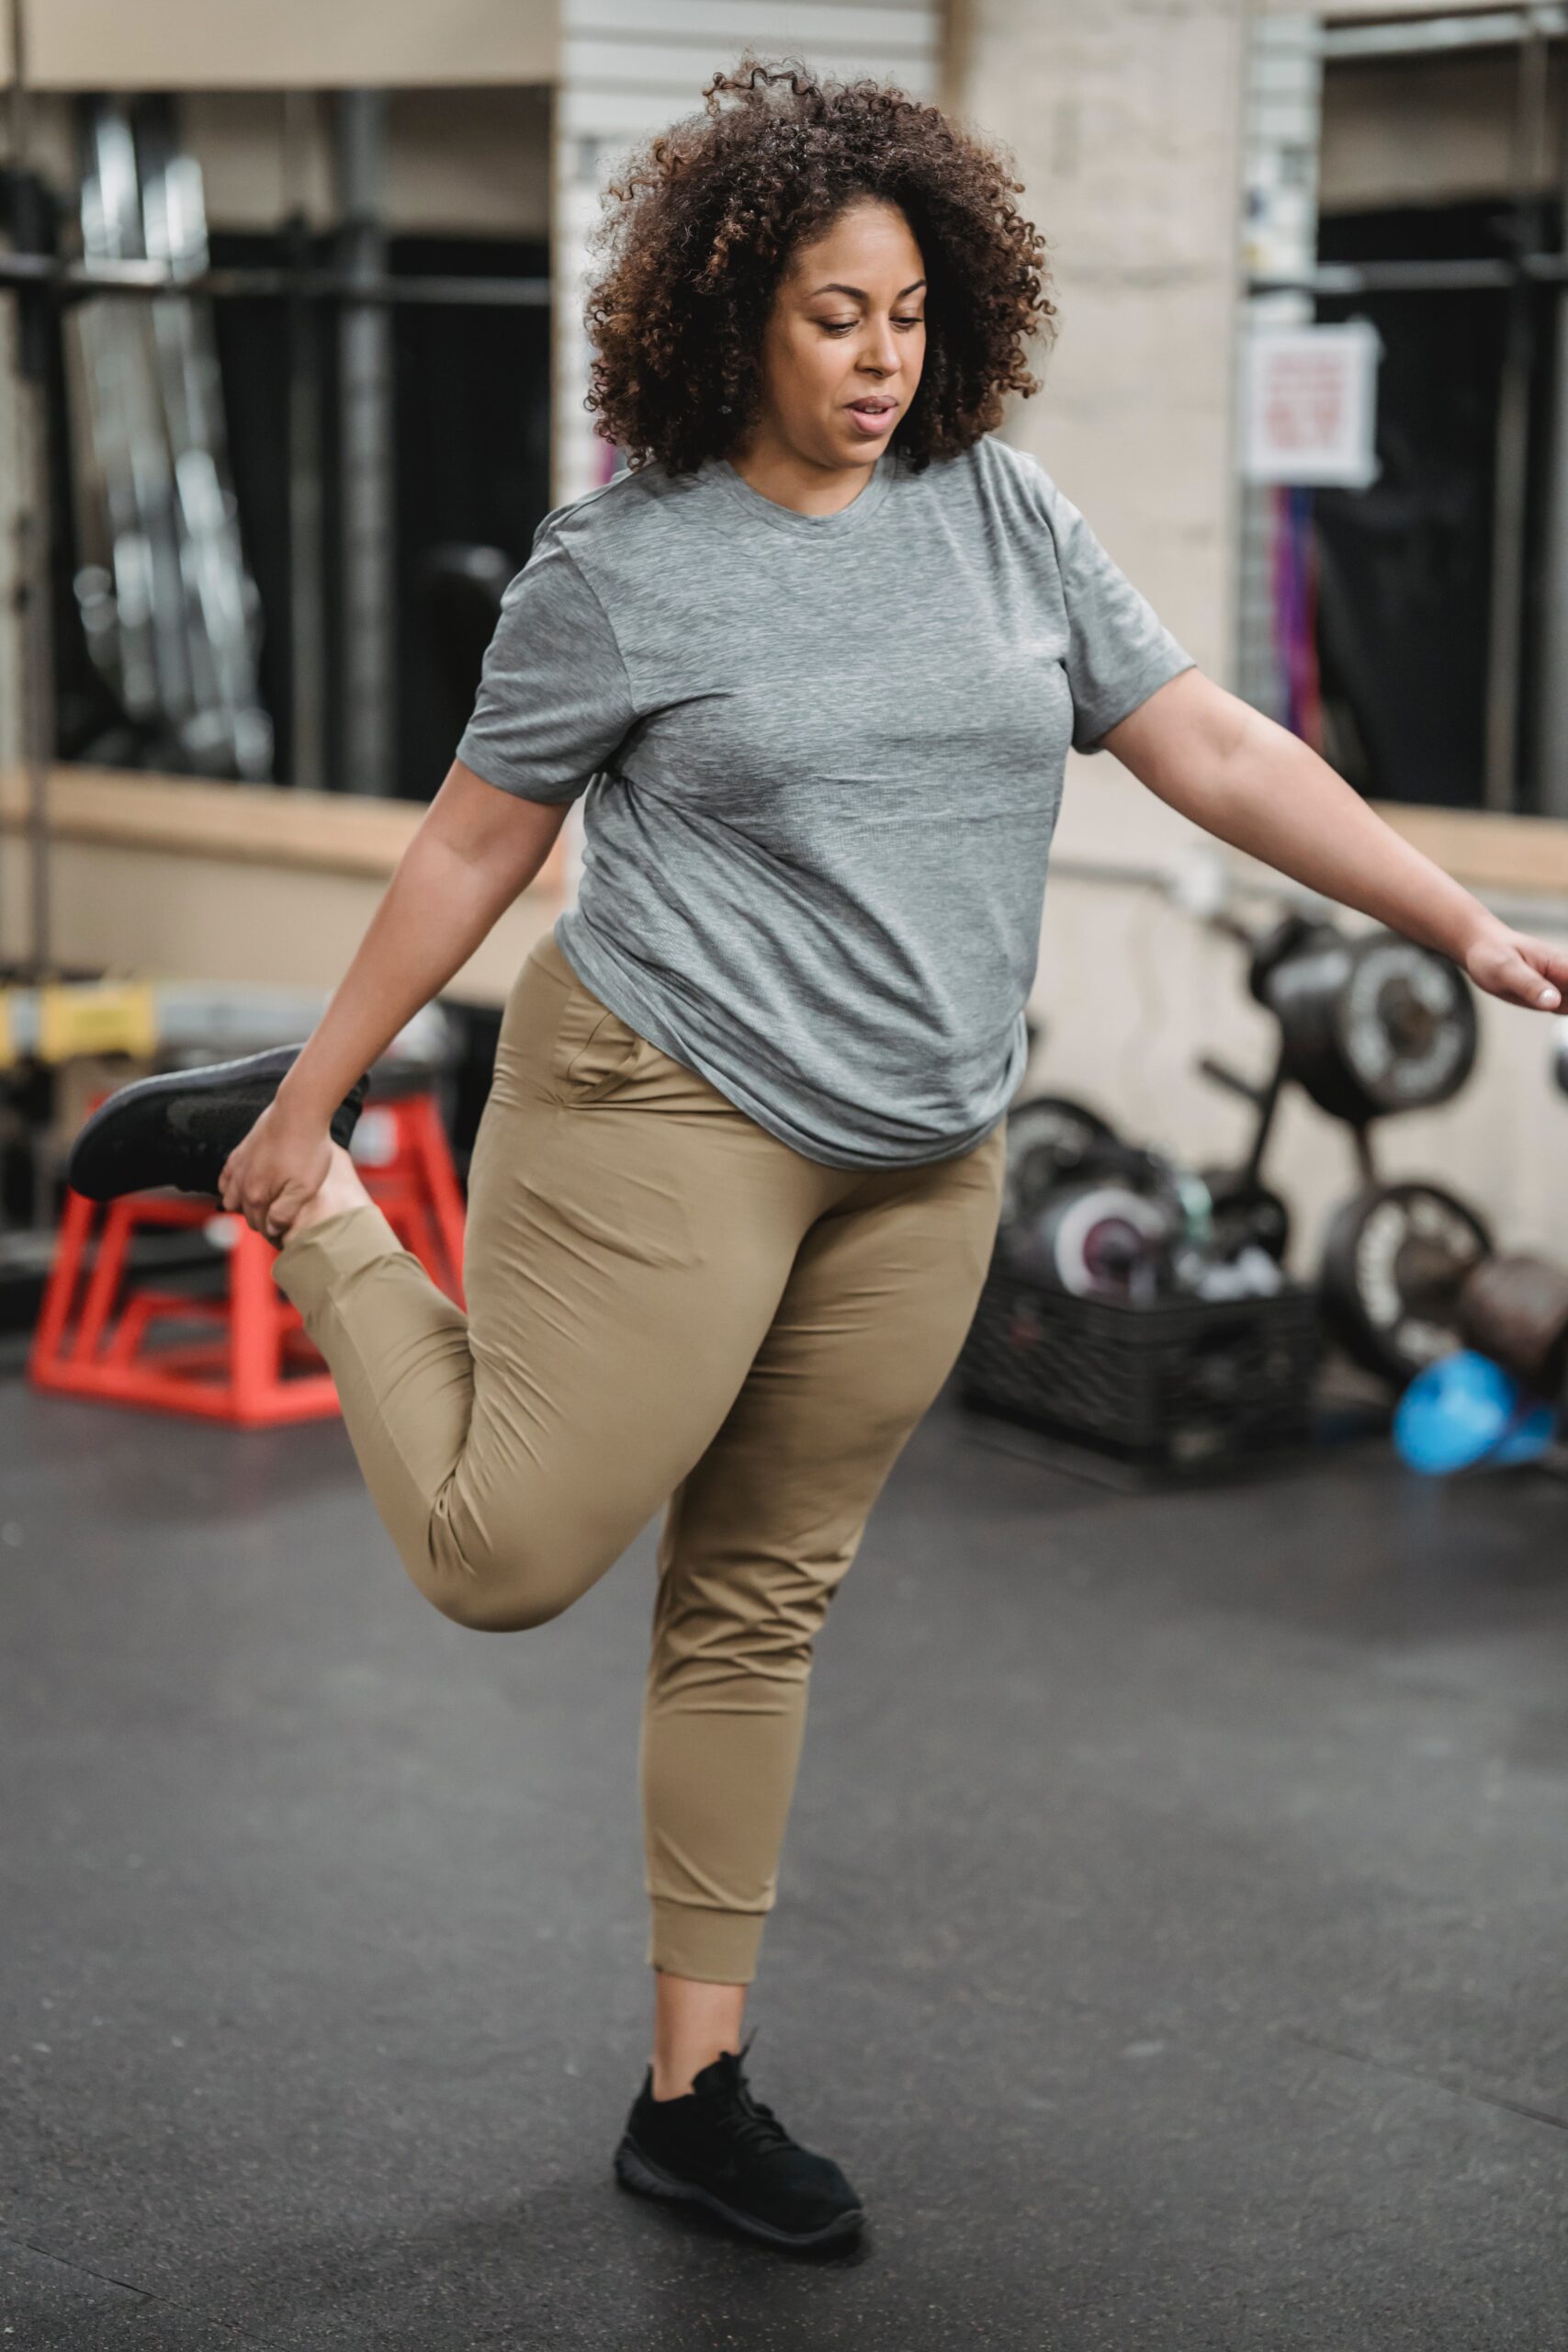 best gym t-shirts for plus size women - top picks and buyer's guide